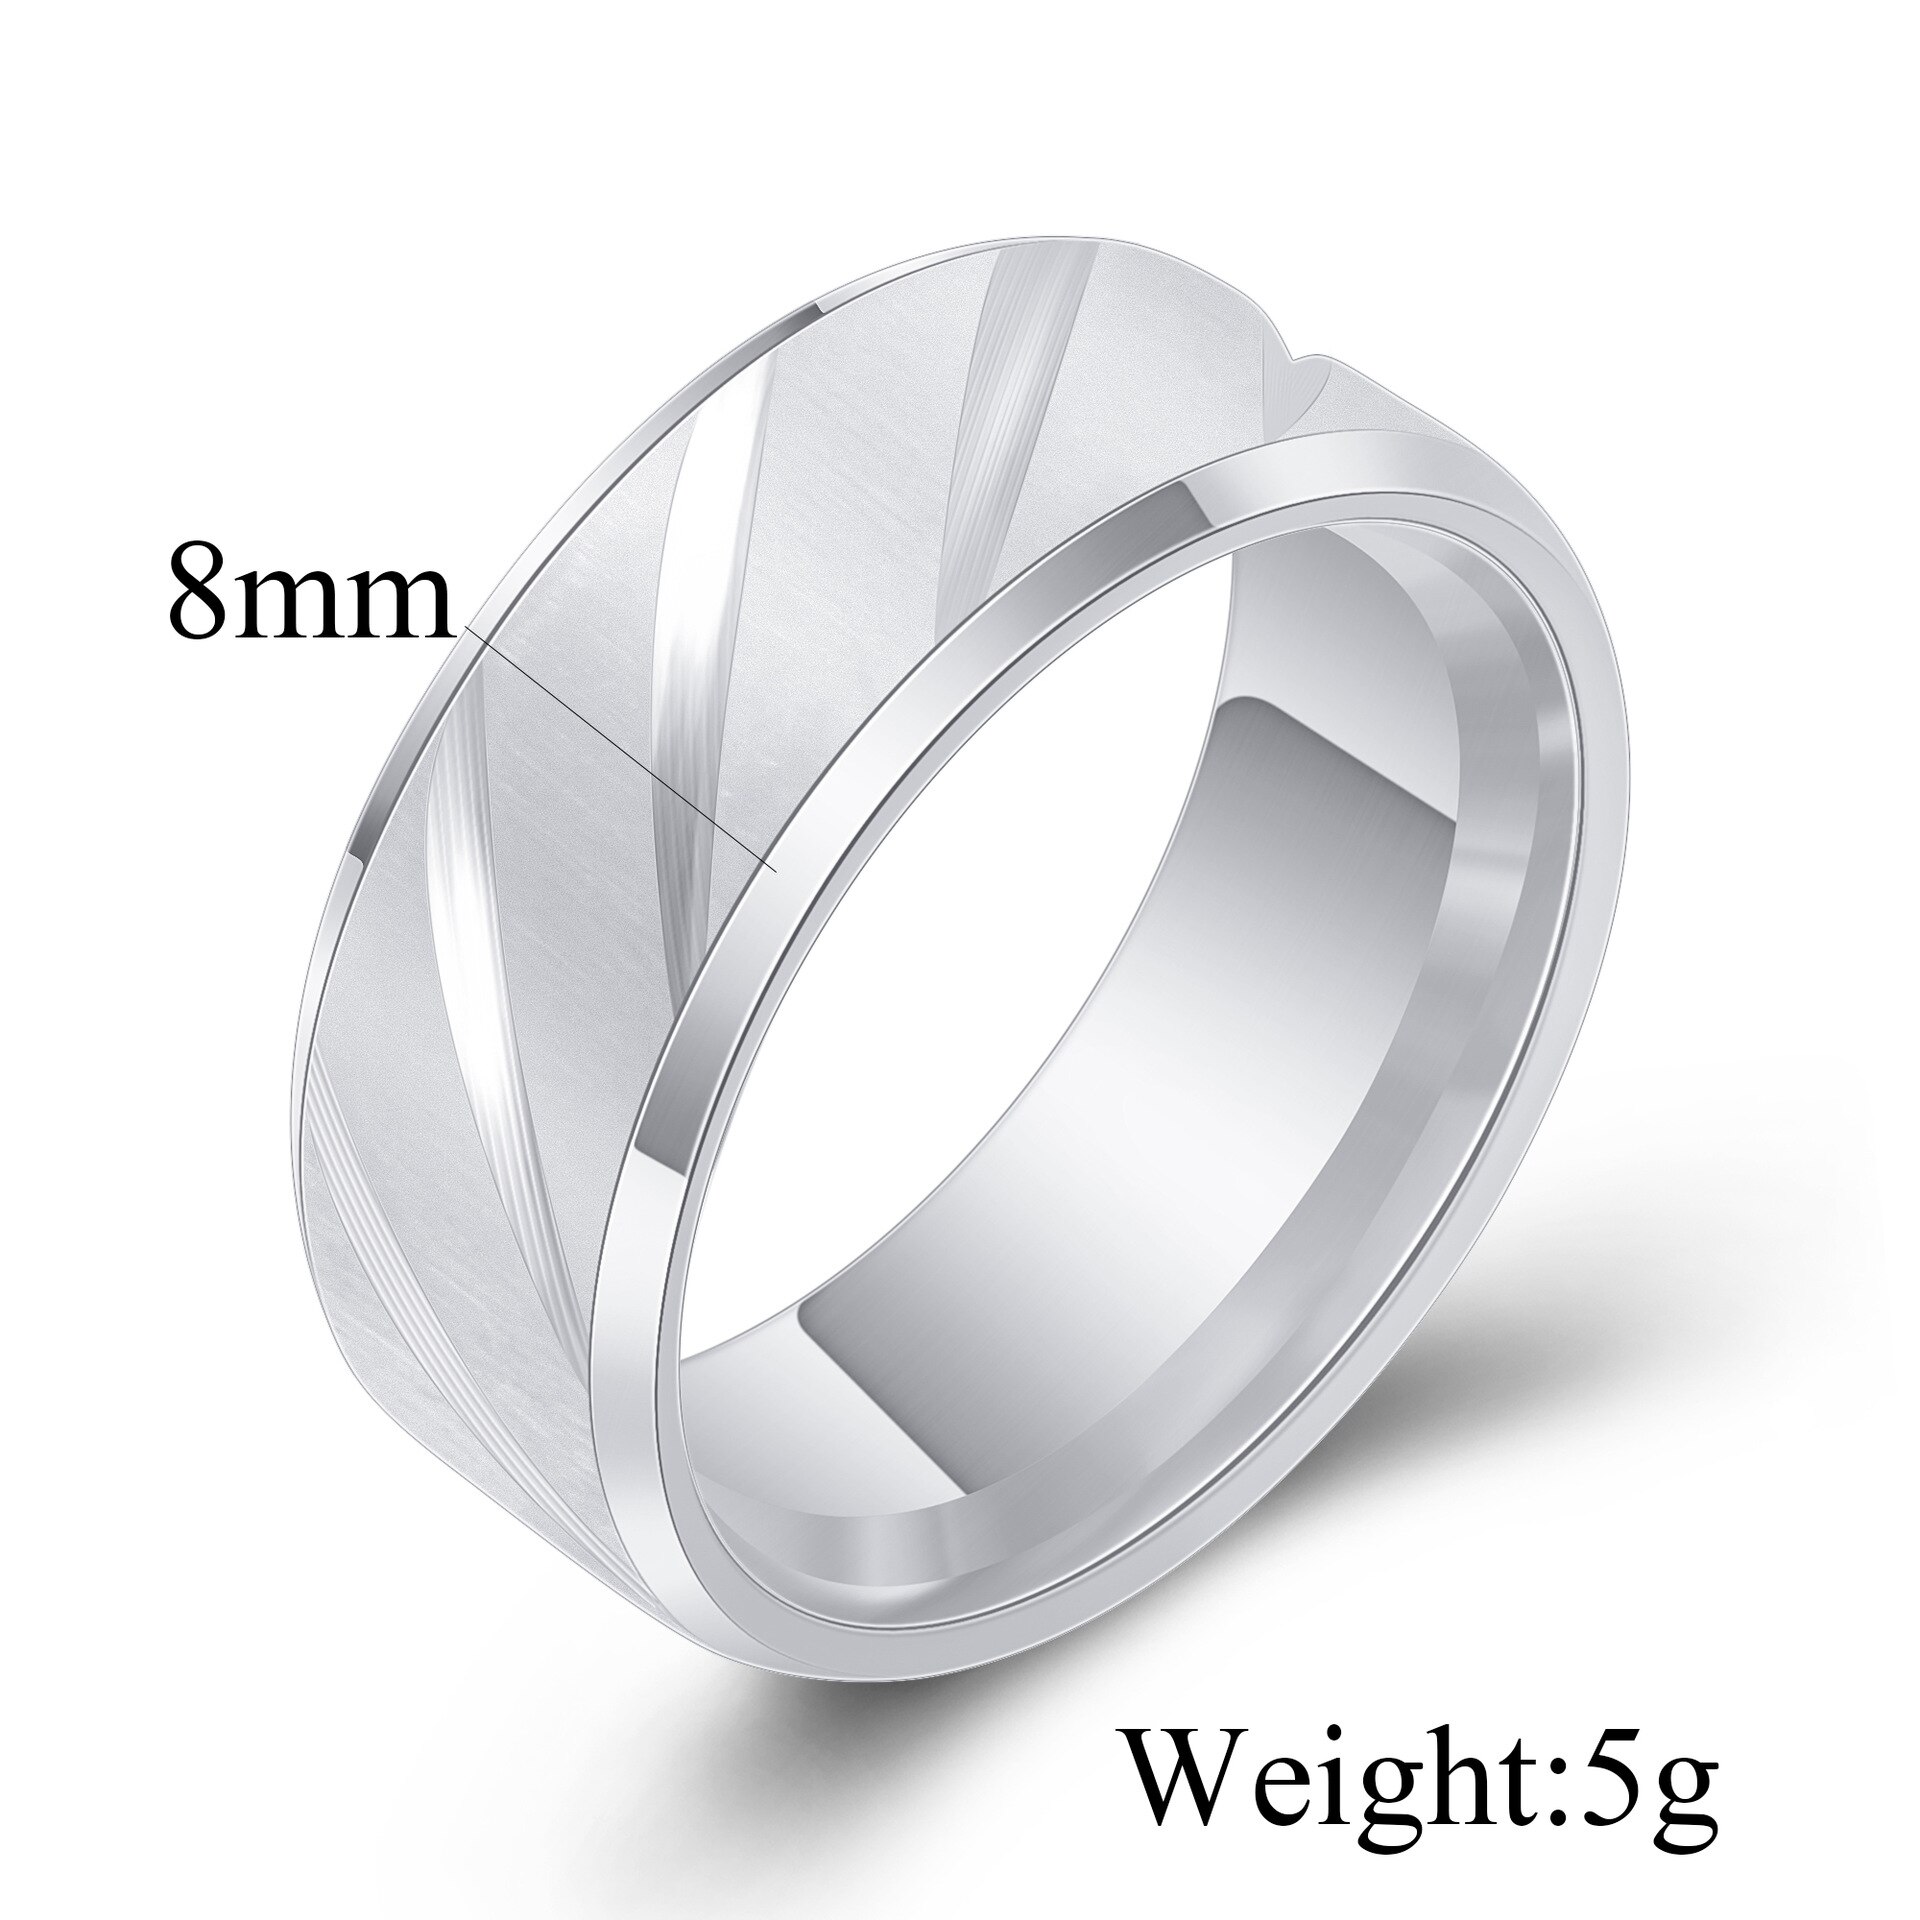 Hot Slimming Ring Magnetic Weight Loss Ring Fitness Reduce Weight Ring String Stimulating Acupoints Gallstone Slimming Products